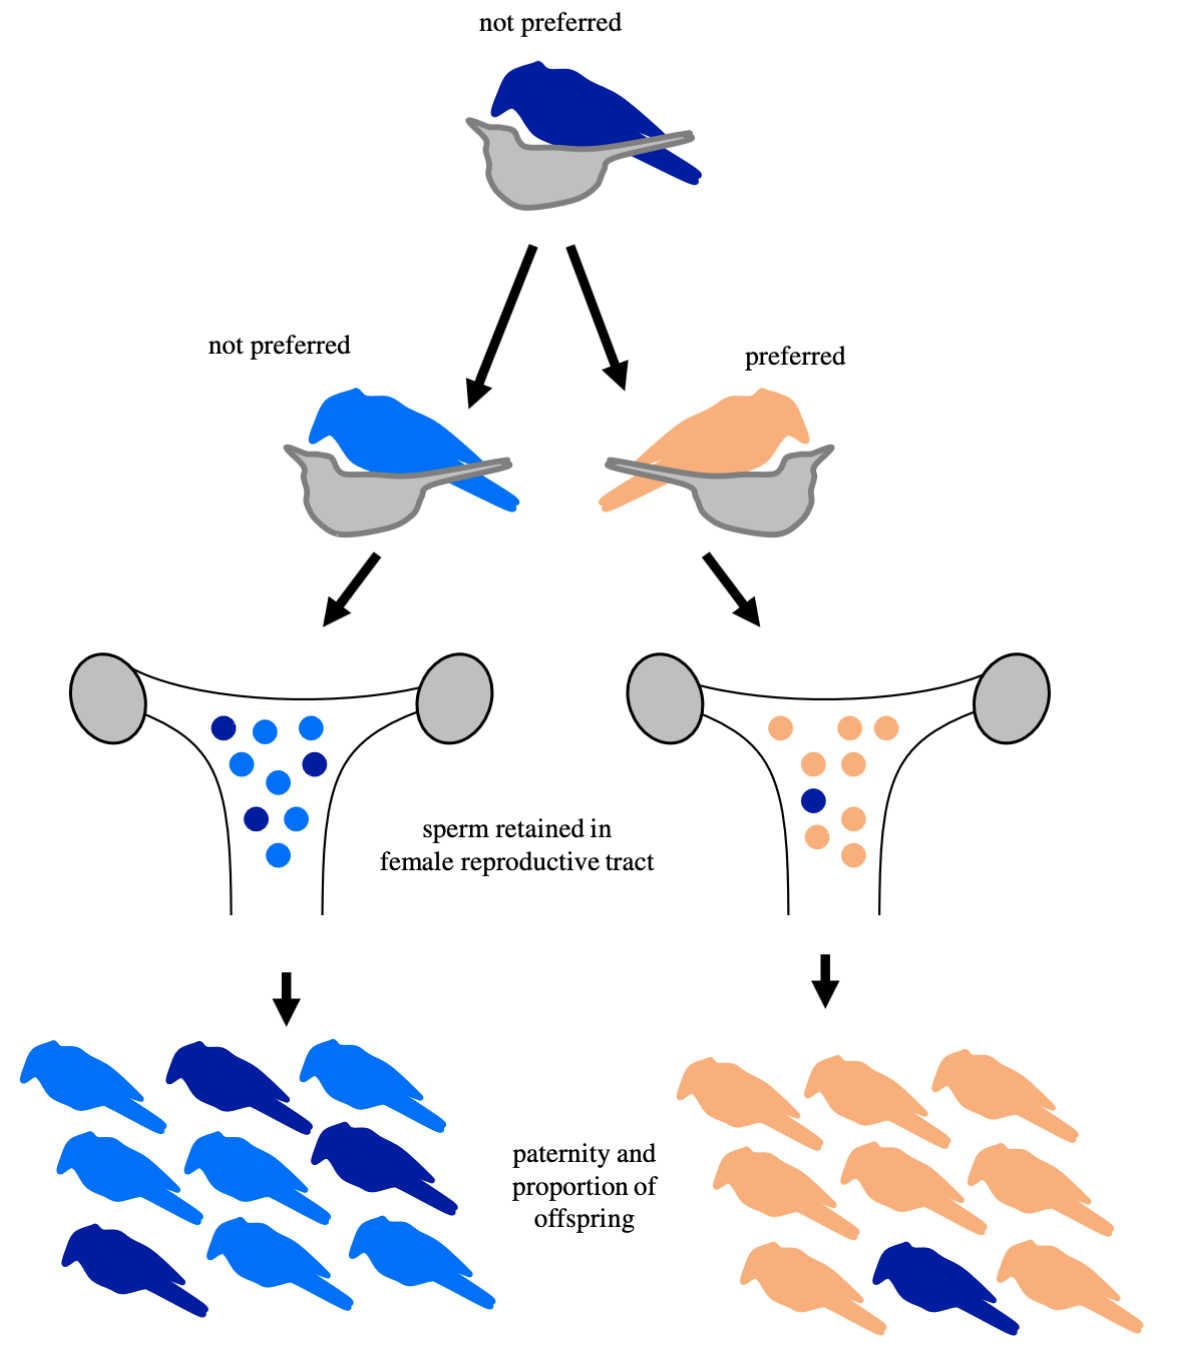 Diagram showing offspring outcomes of preferred and not-preferred male partners